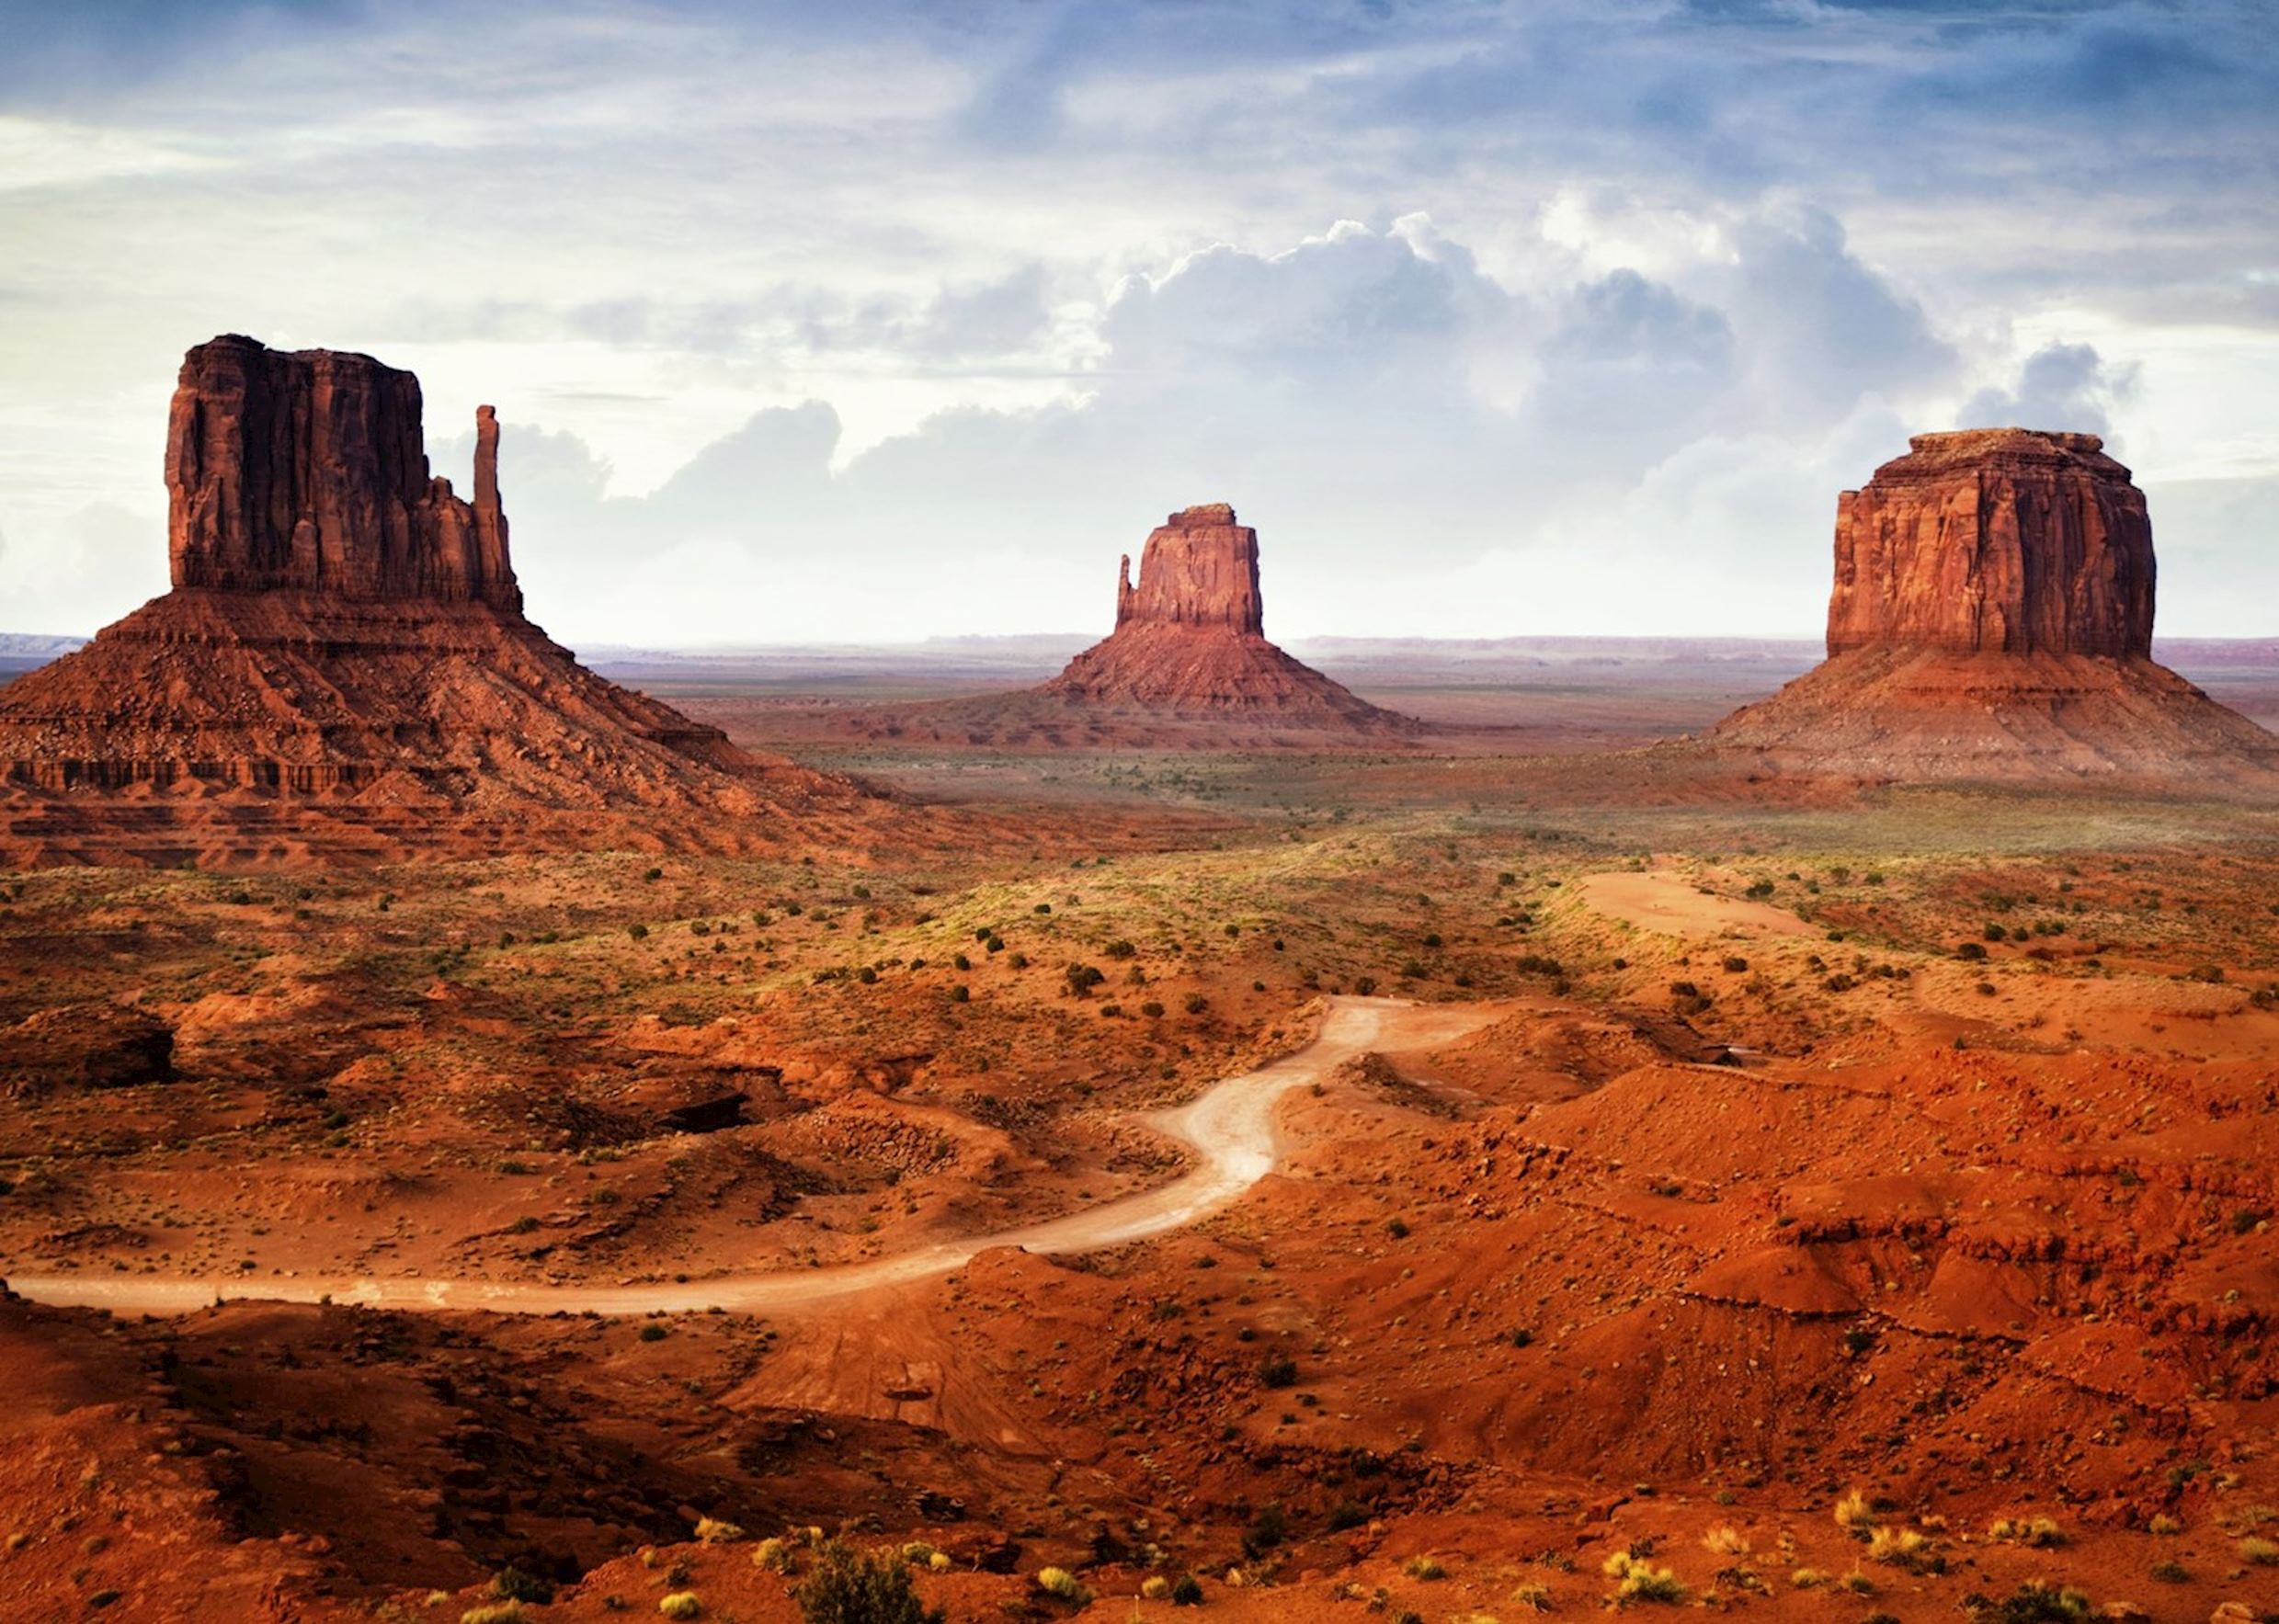 Visit Monument Valley Navajo Tribal Park | Audley Travel